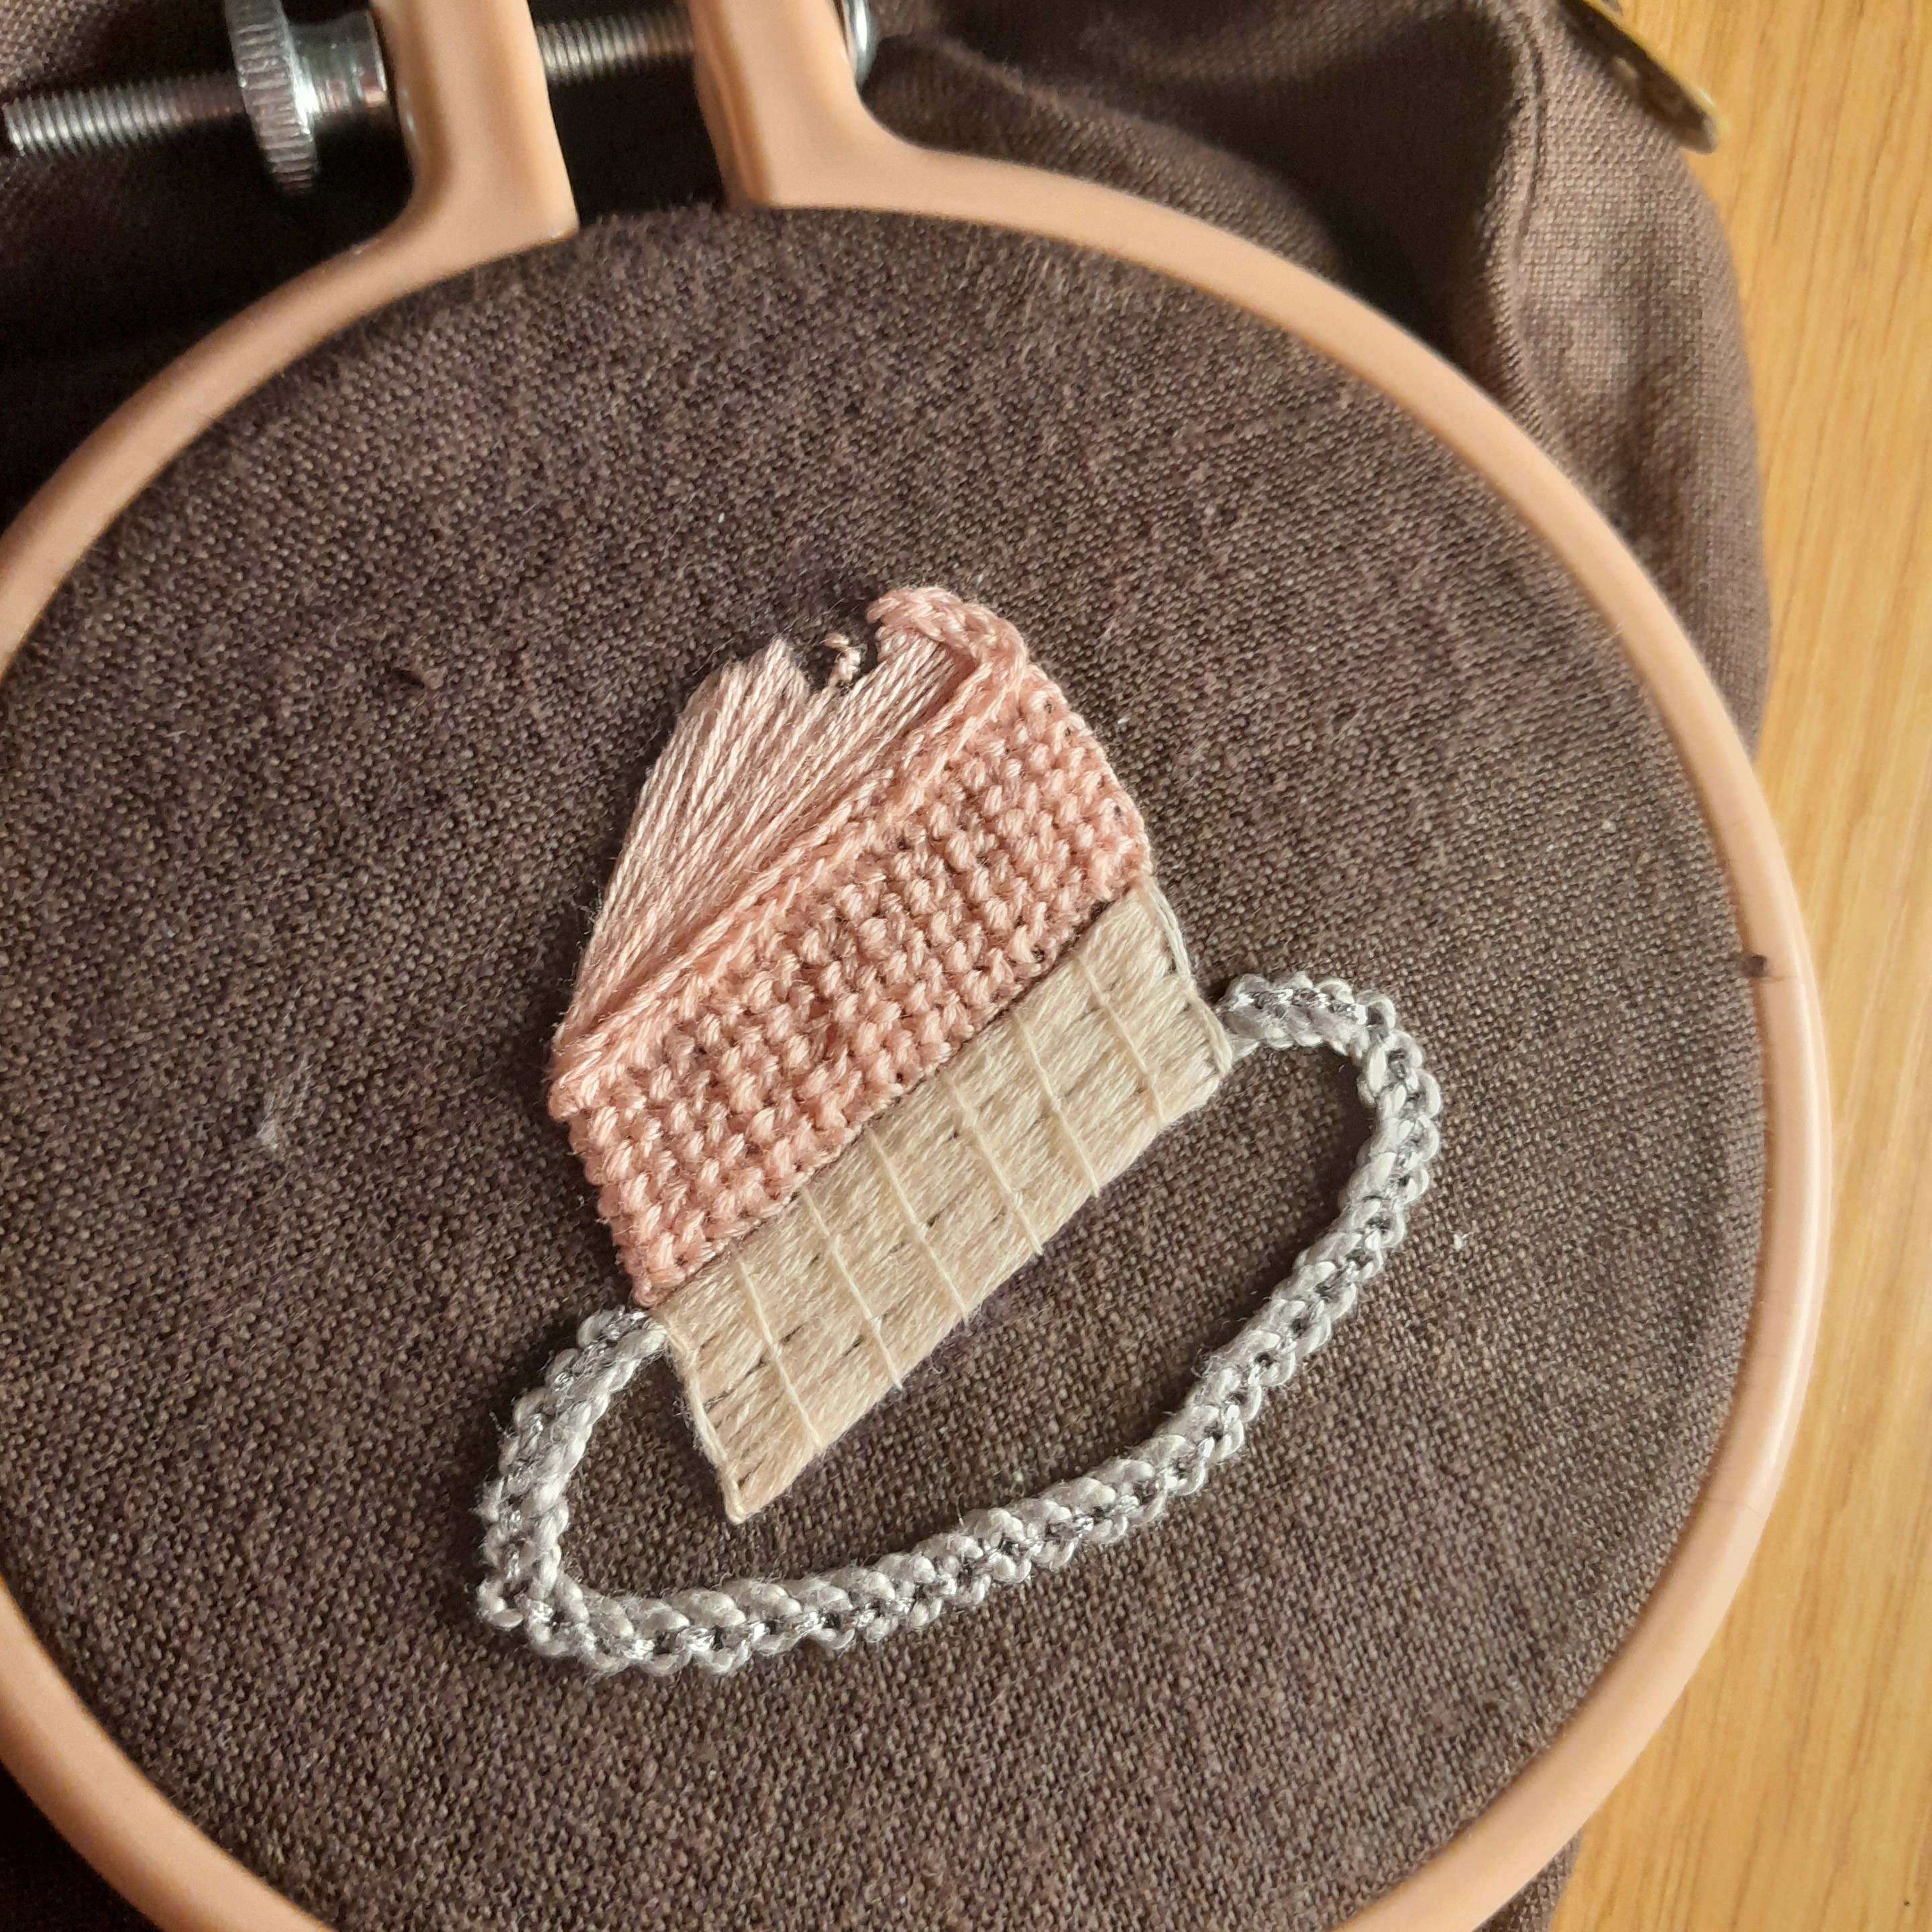 picture of an embroidery of a strawberry cake in progress. only some of the top is missing.